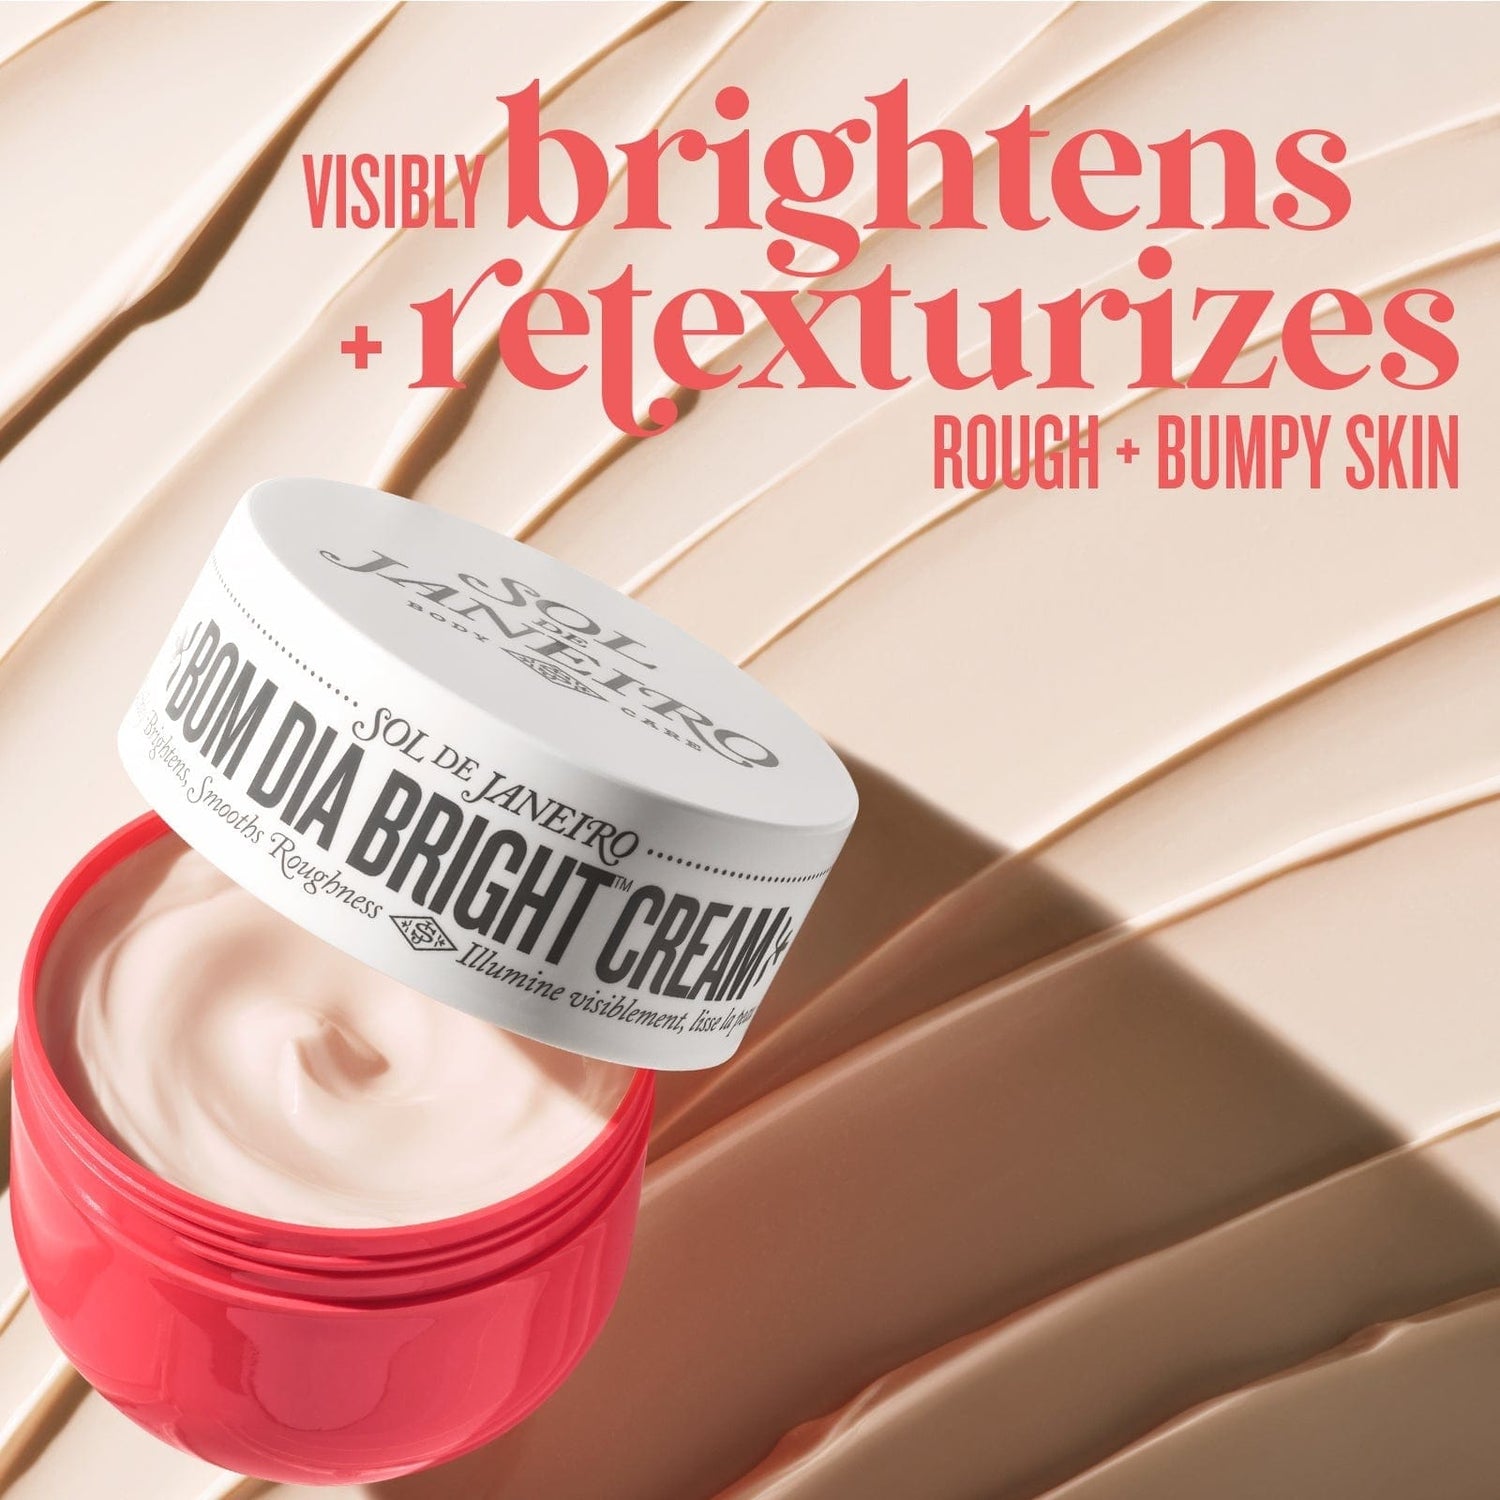 Visibly brightens + retexturized rough + bumpy skin.